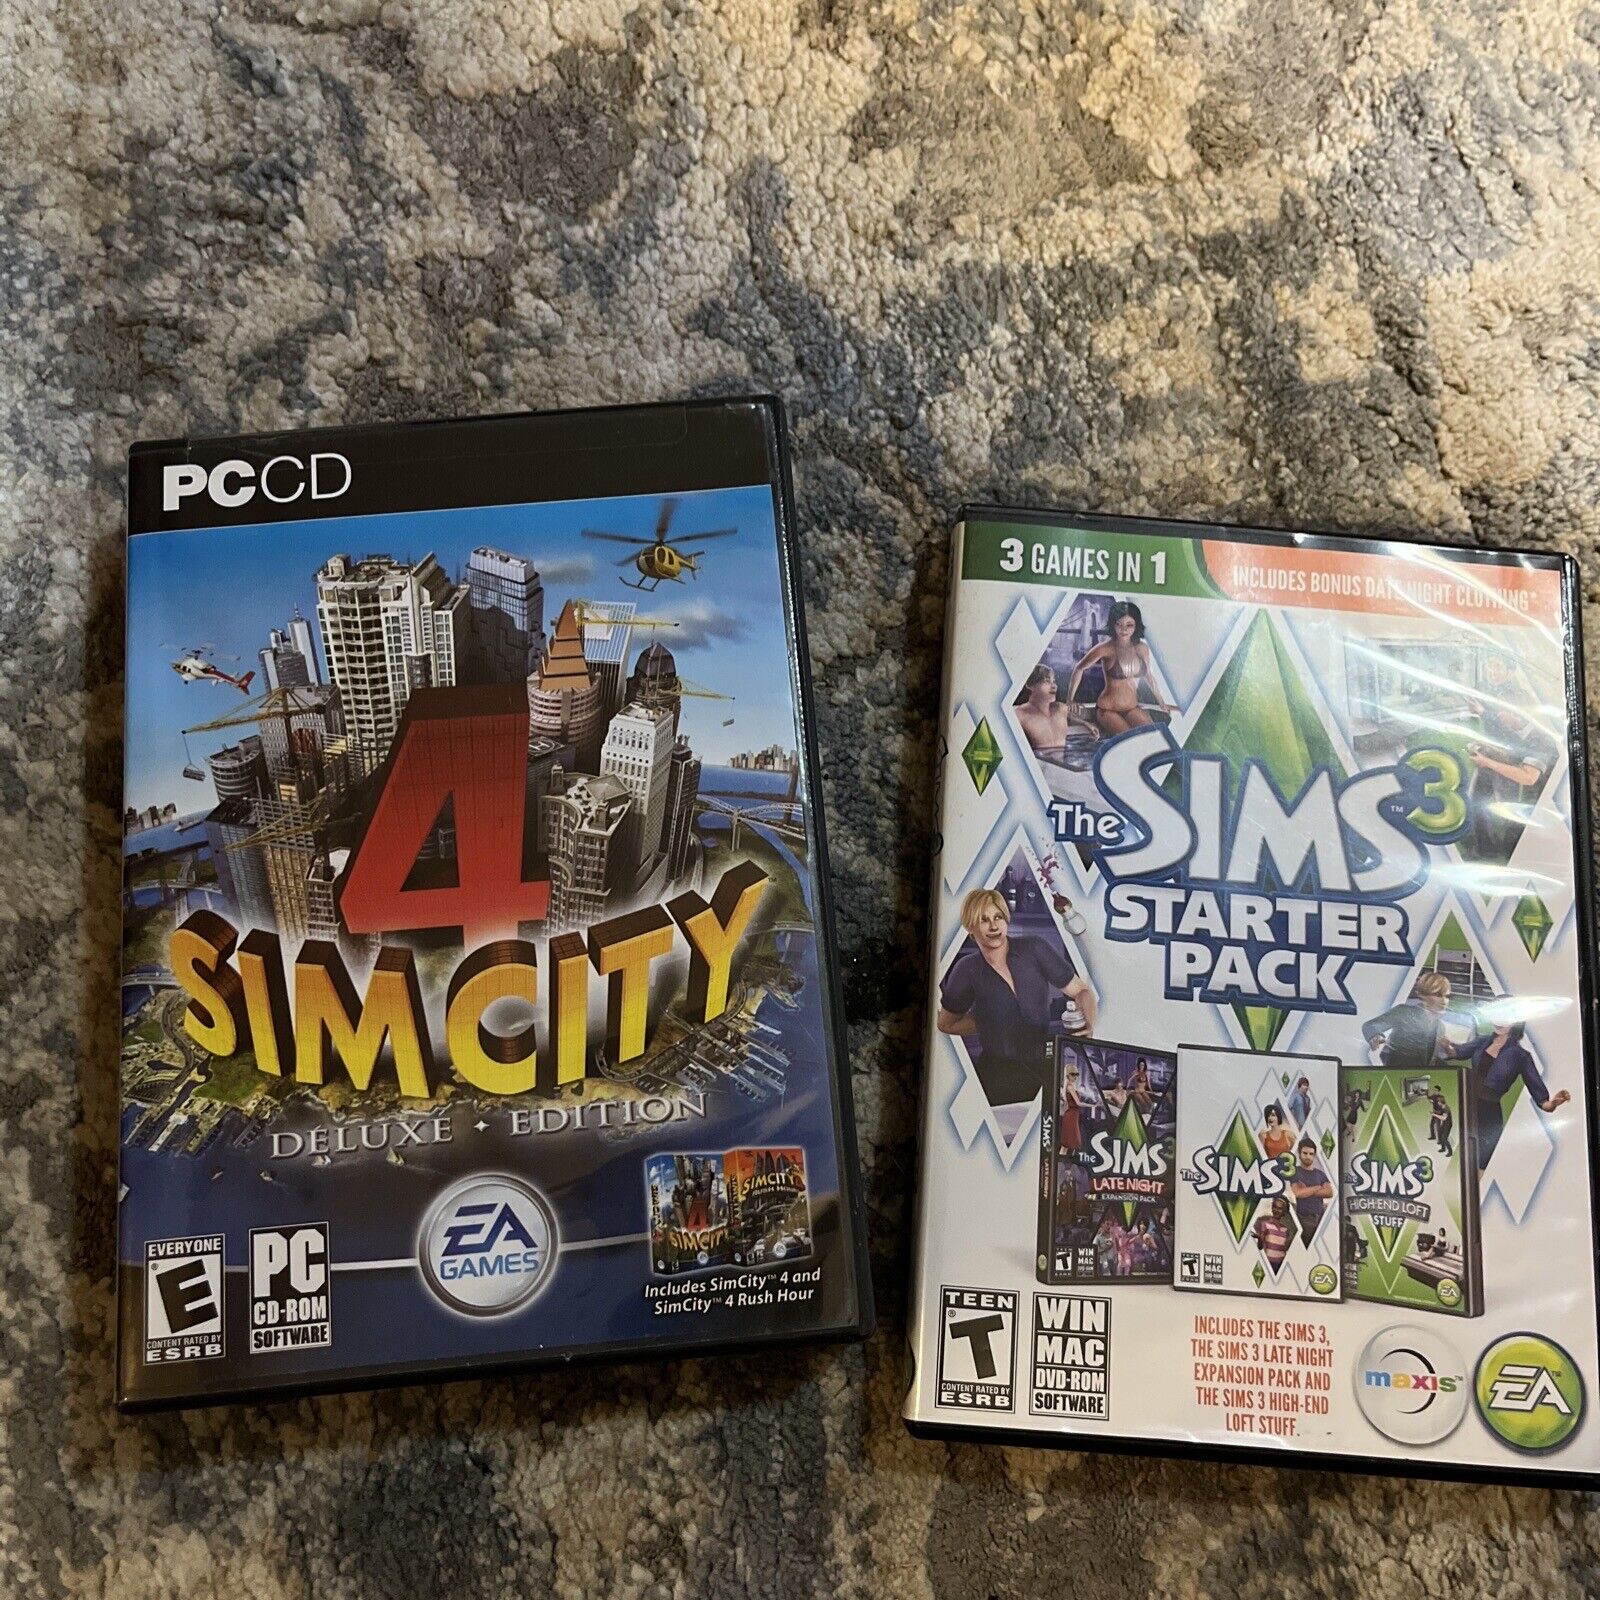 Sim City 4 Deluxe Edition and Sims 3 Starter Pack I/c  Sims 3 Sims Late Night +